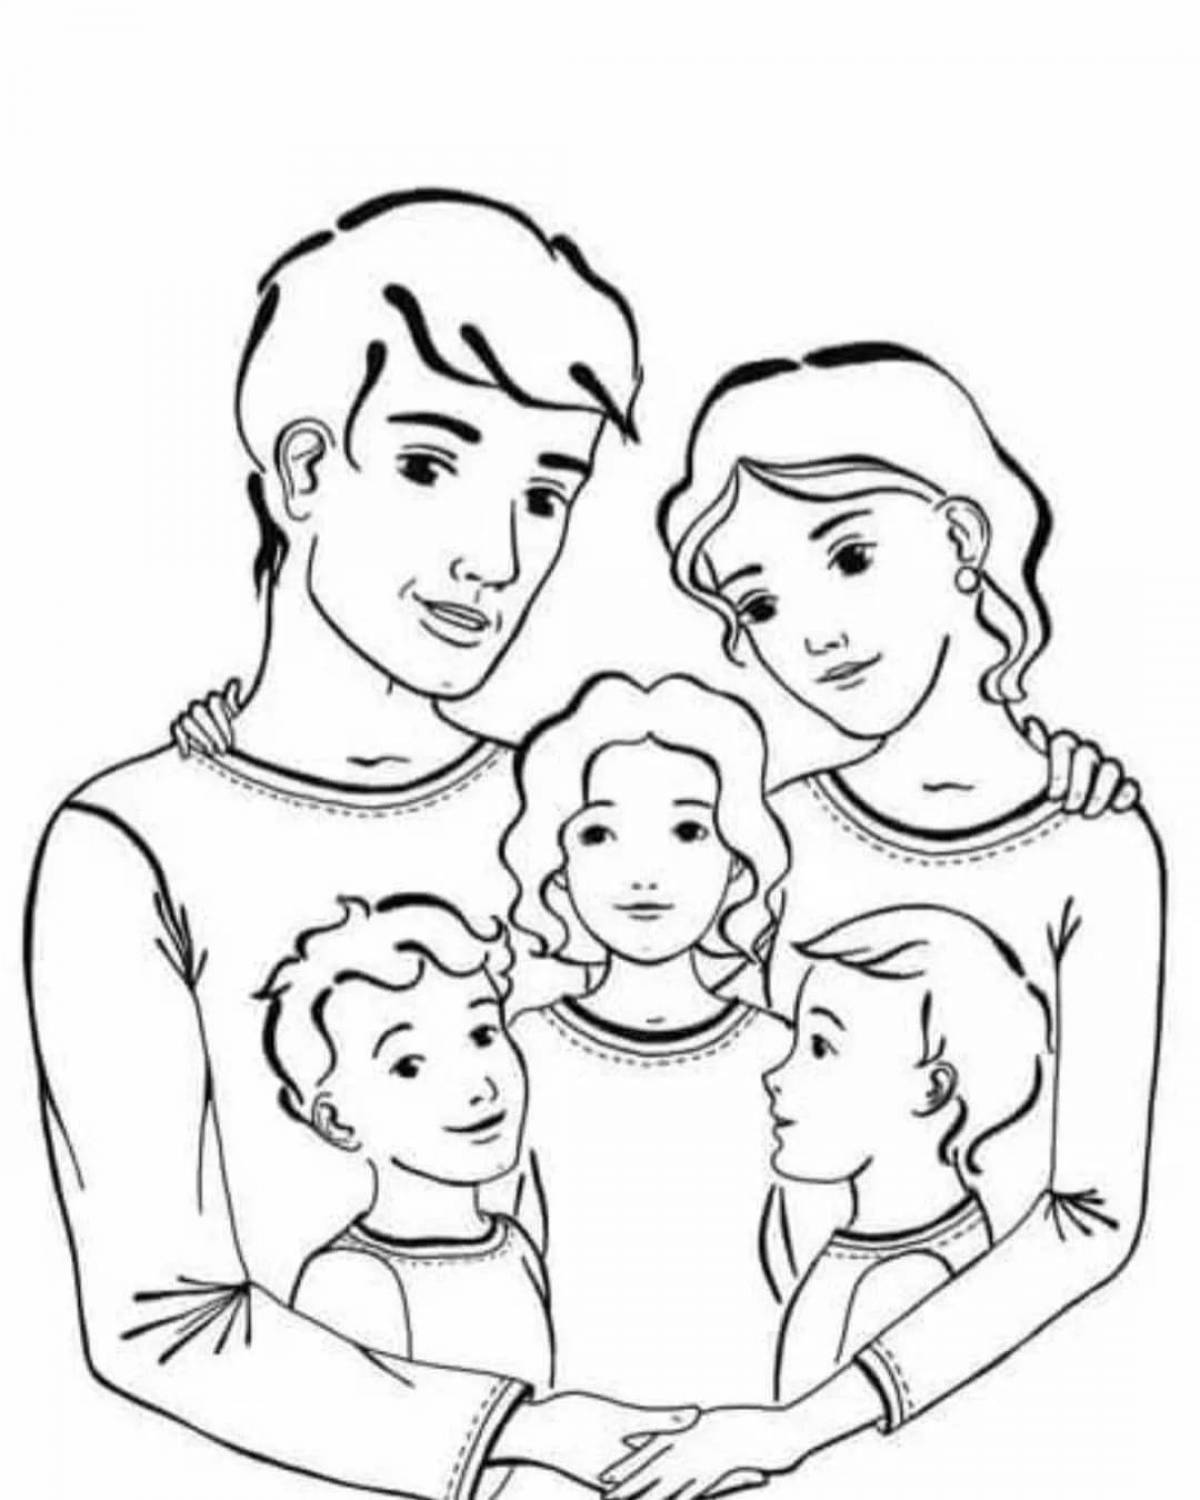 Relaxing family coloring book